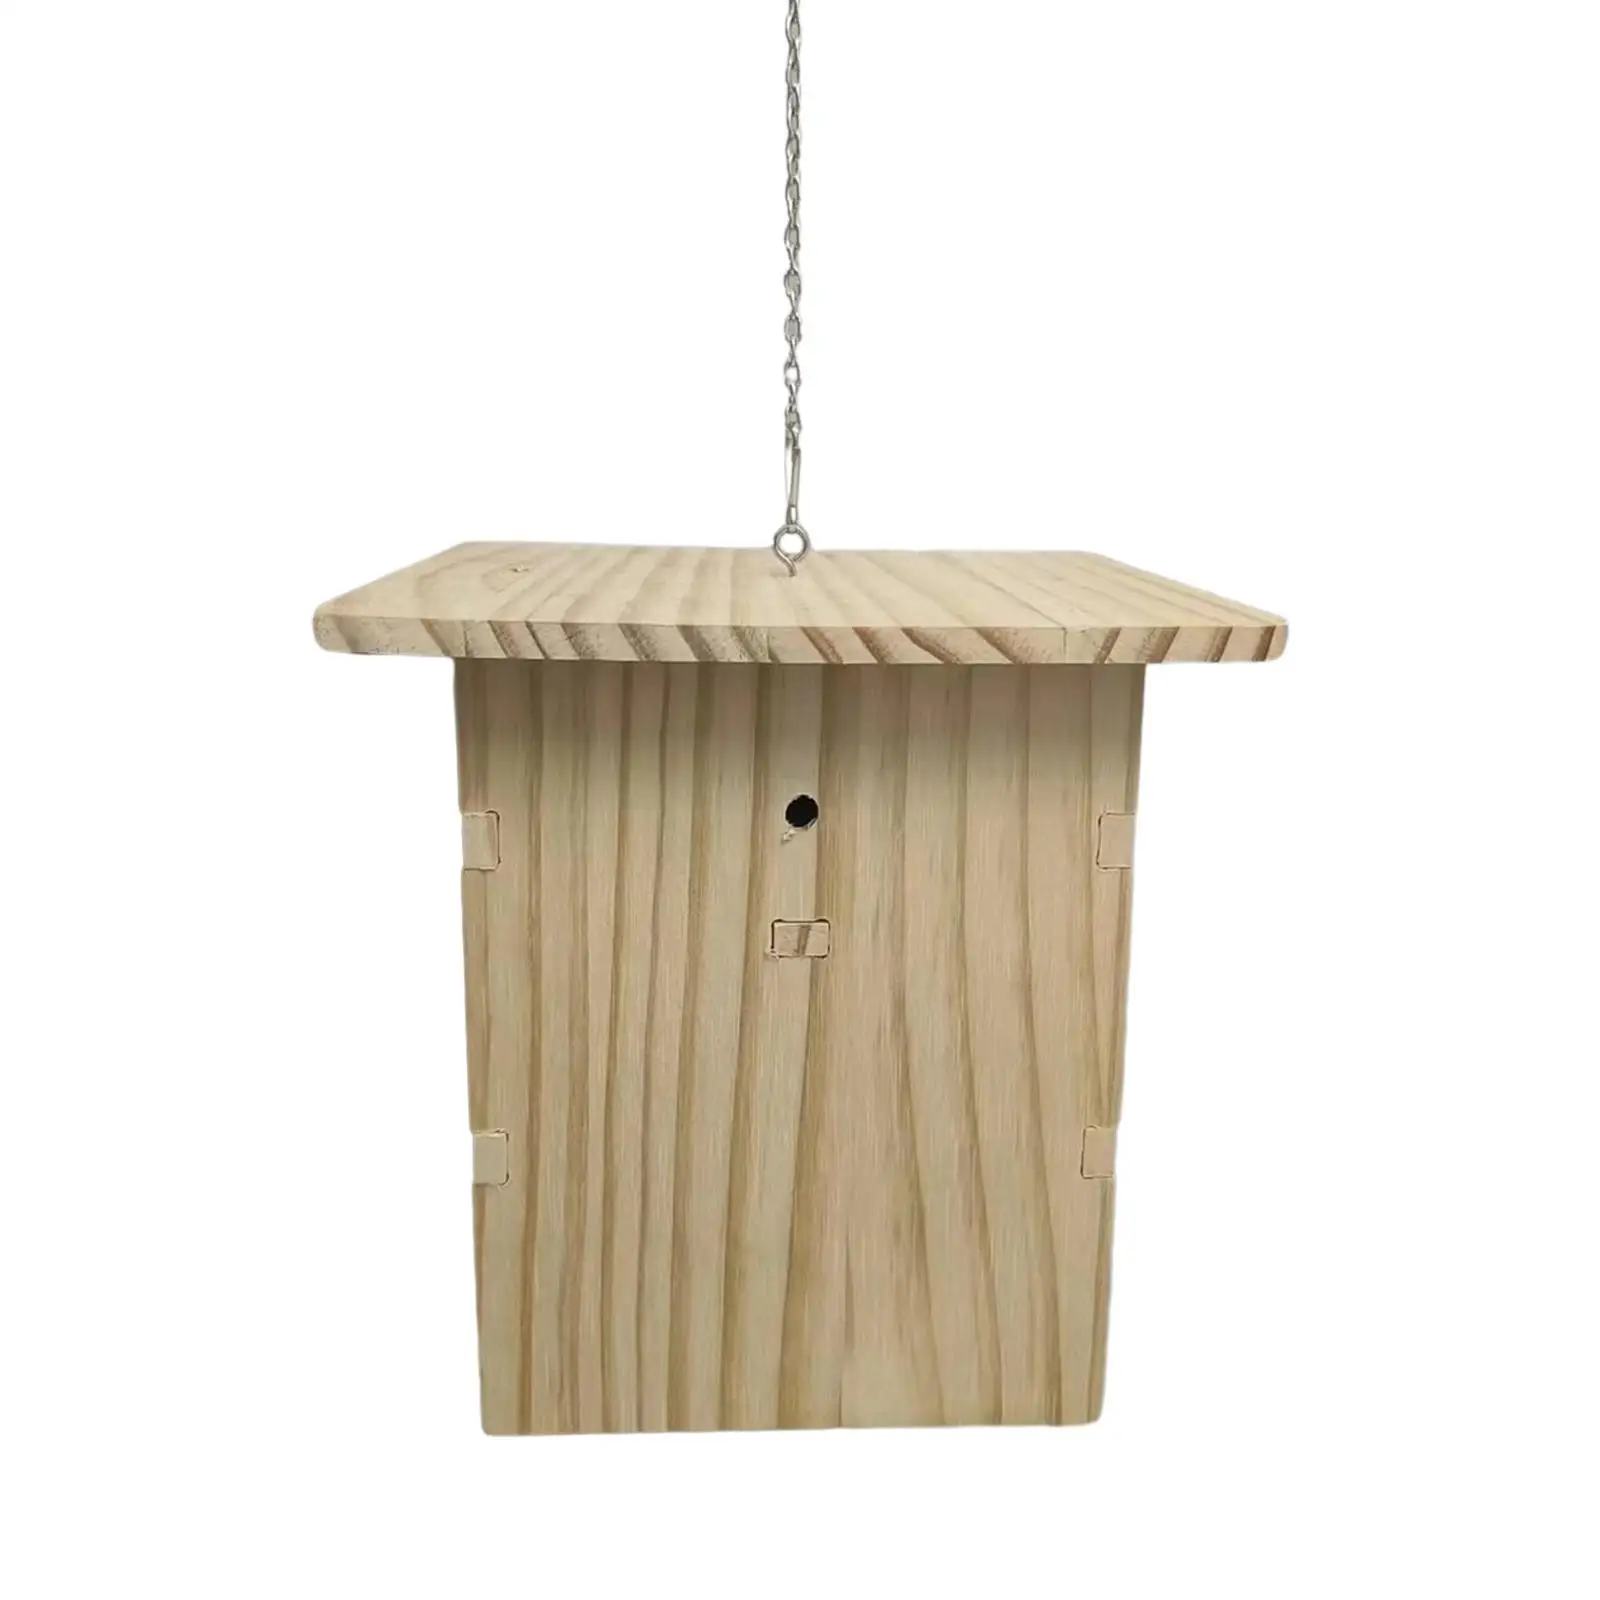 Carpenter Bee Trap with Wooden Frame with Chains Swarm Lure Bait Hanging Insect Fly Trap for Outdoor Orchard Beekeeping Adults